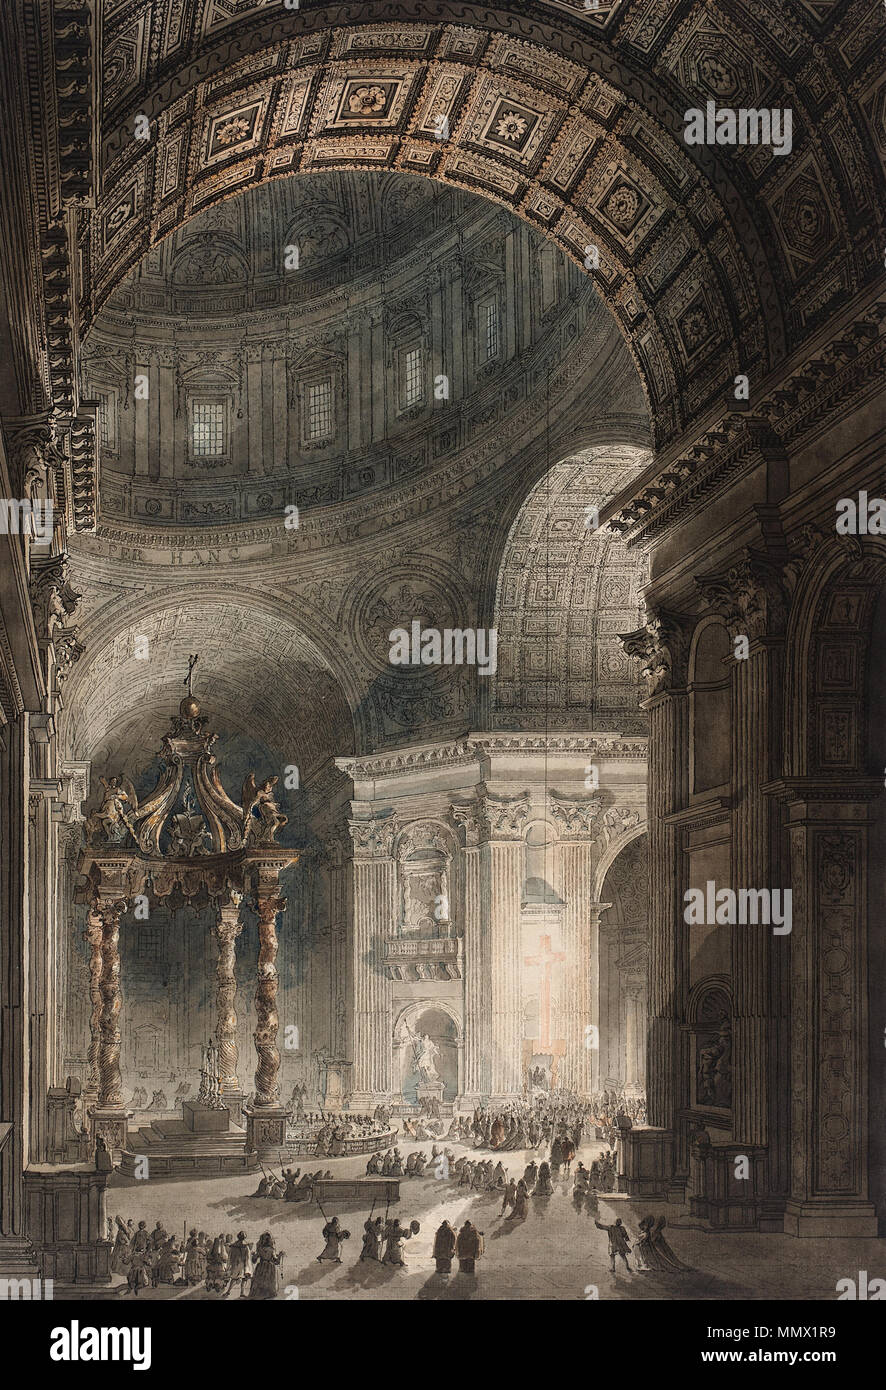 . Proof: First state of two  Illumination of the Cross in St. Peter's on Good Friday. 1787. Desprez, Piranesi - Illumination of the Cross in St. Peter's on Good Friday Stock Photo